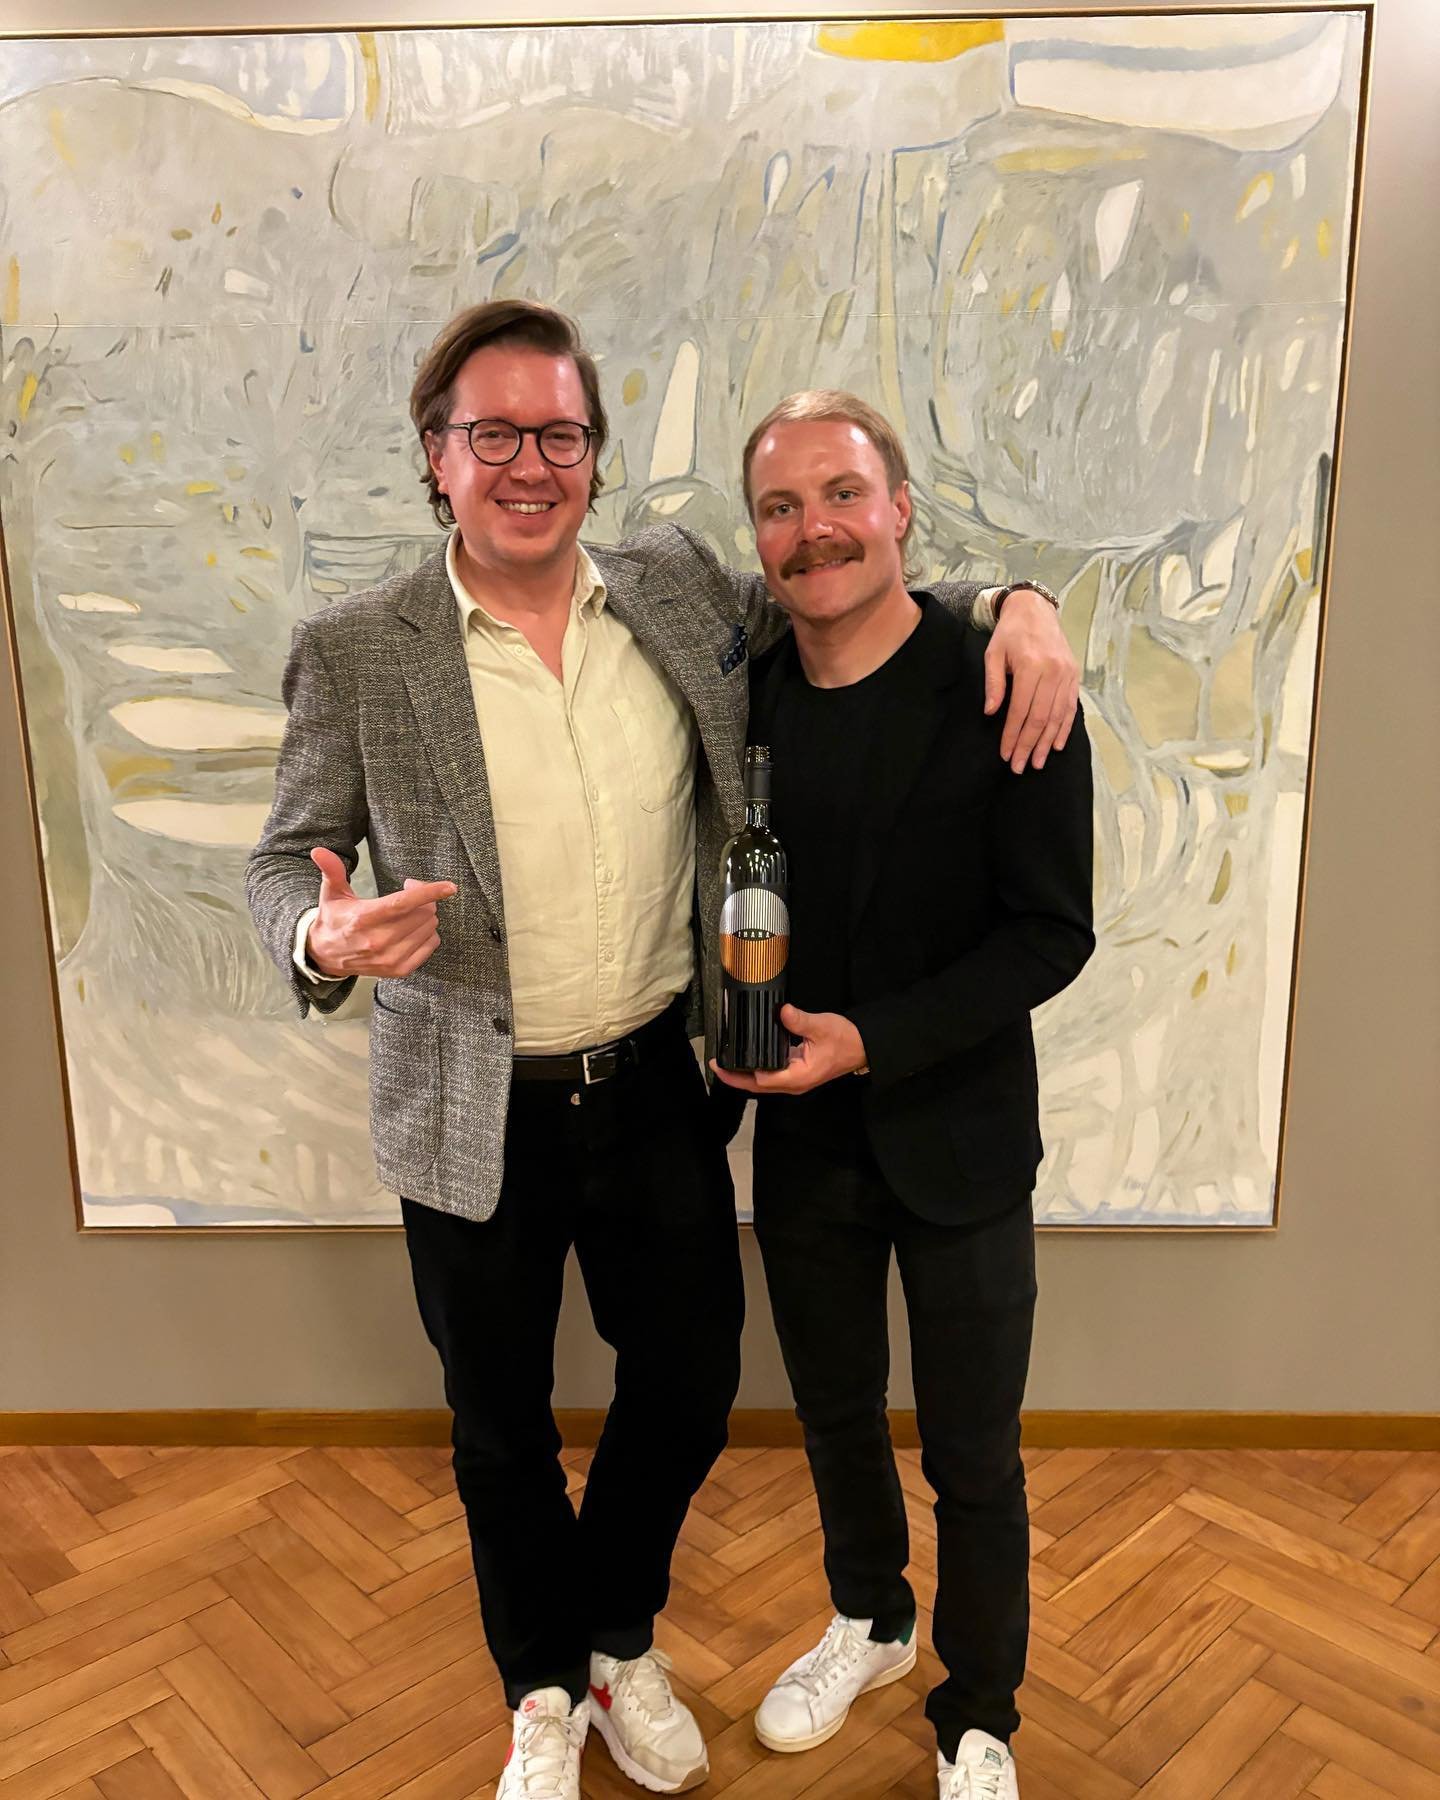 IHANA Shiraz 2022 is now available in Finland. Have you tried it yet? 🍷🔥
🐻 In December we launched IHANA Shiraz with winemaker Corrina Wright of Oliver&rsquo;s Taranga and Valtteri Bottas during a dinner at Savoy.
🐻 The wine arrived in Finland in